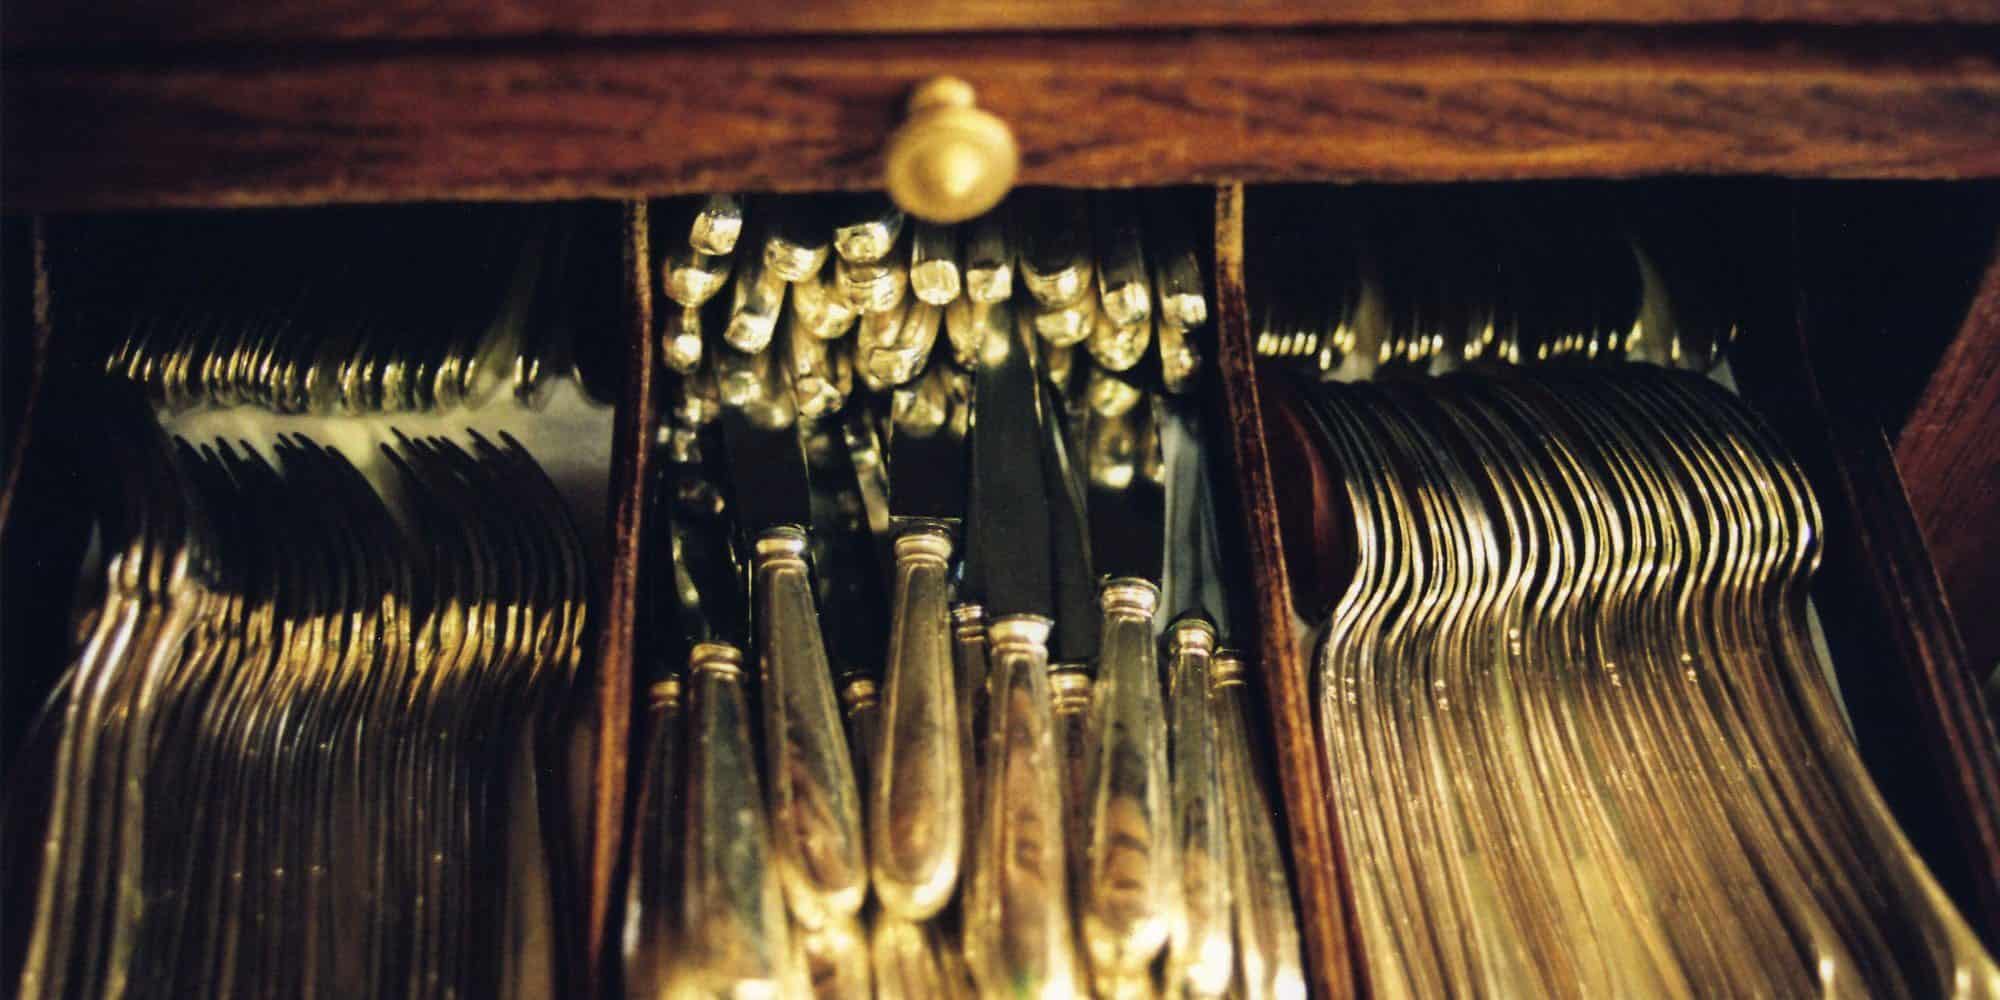 Culterly drawer filled with silverware at Benoit bistro in Paris.